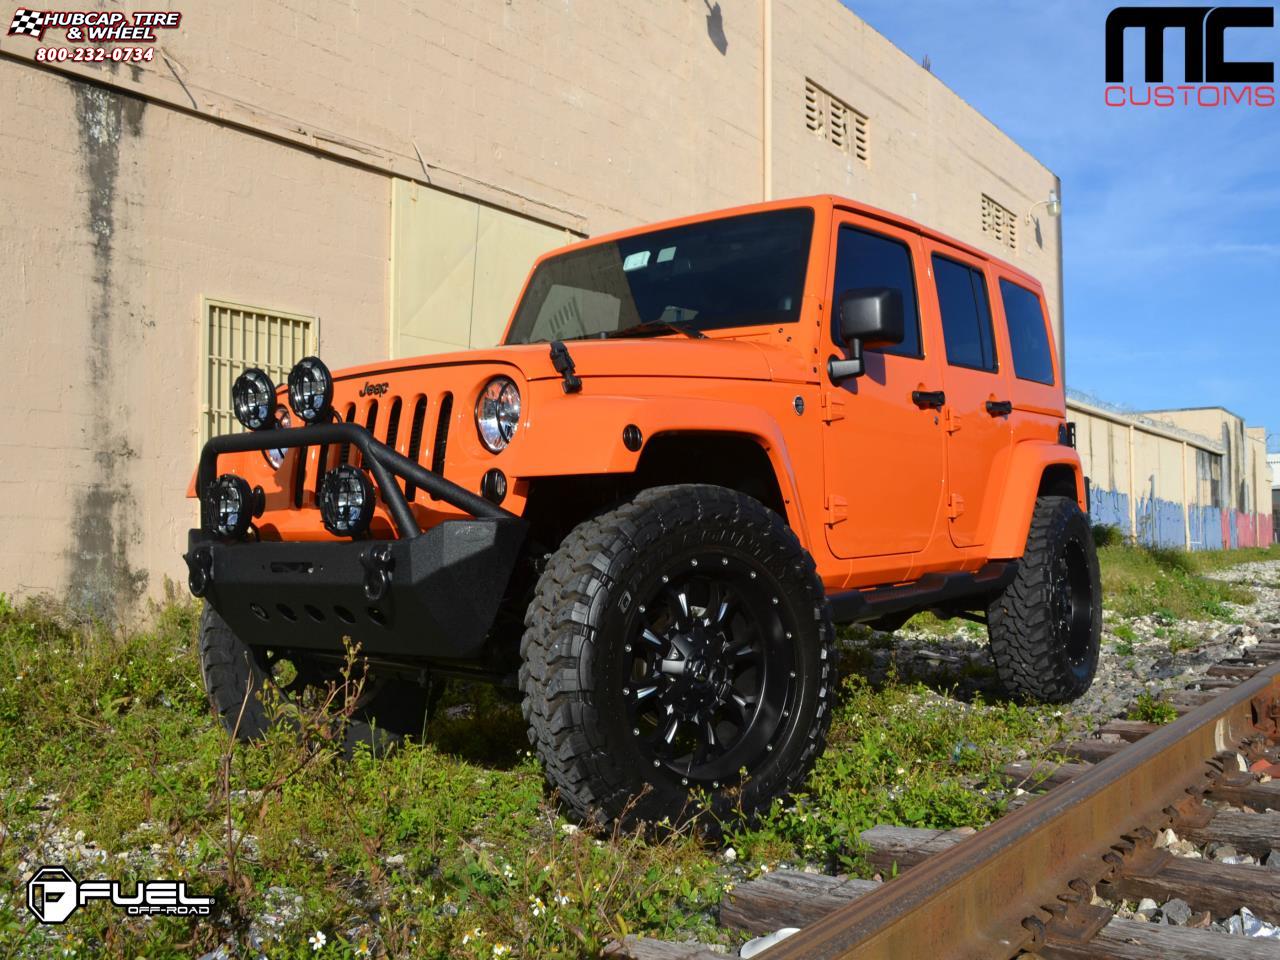 vehicle gallery/jeep wrangler fuel krank d517 0X0  Matte Black & Milled wheels and rims